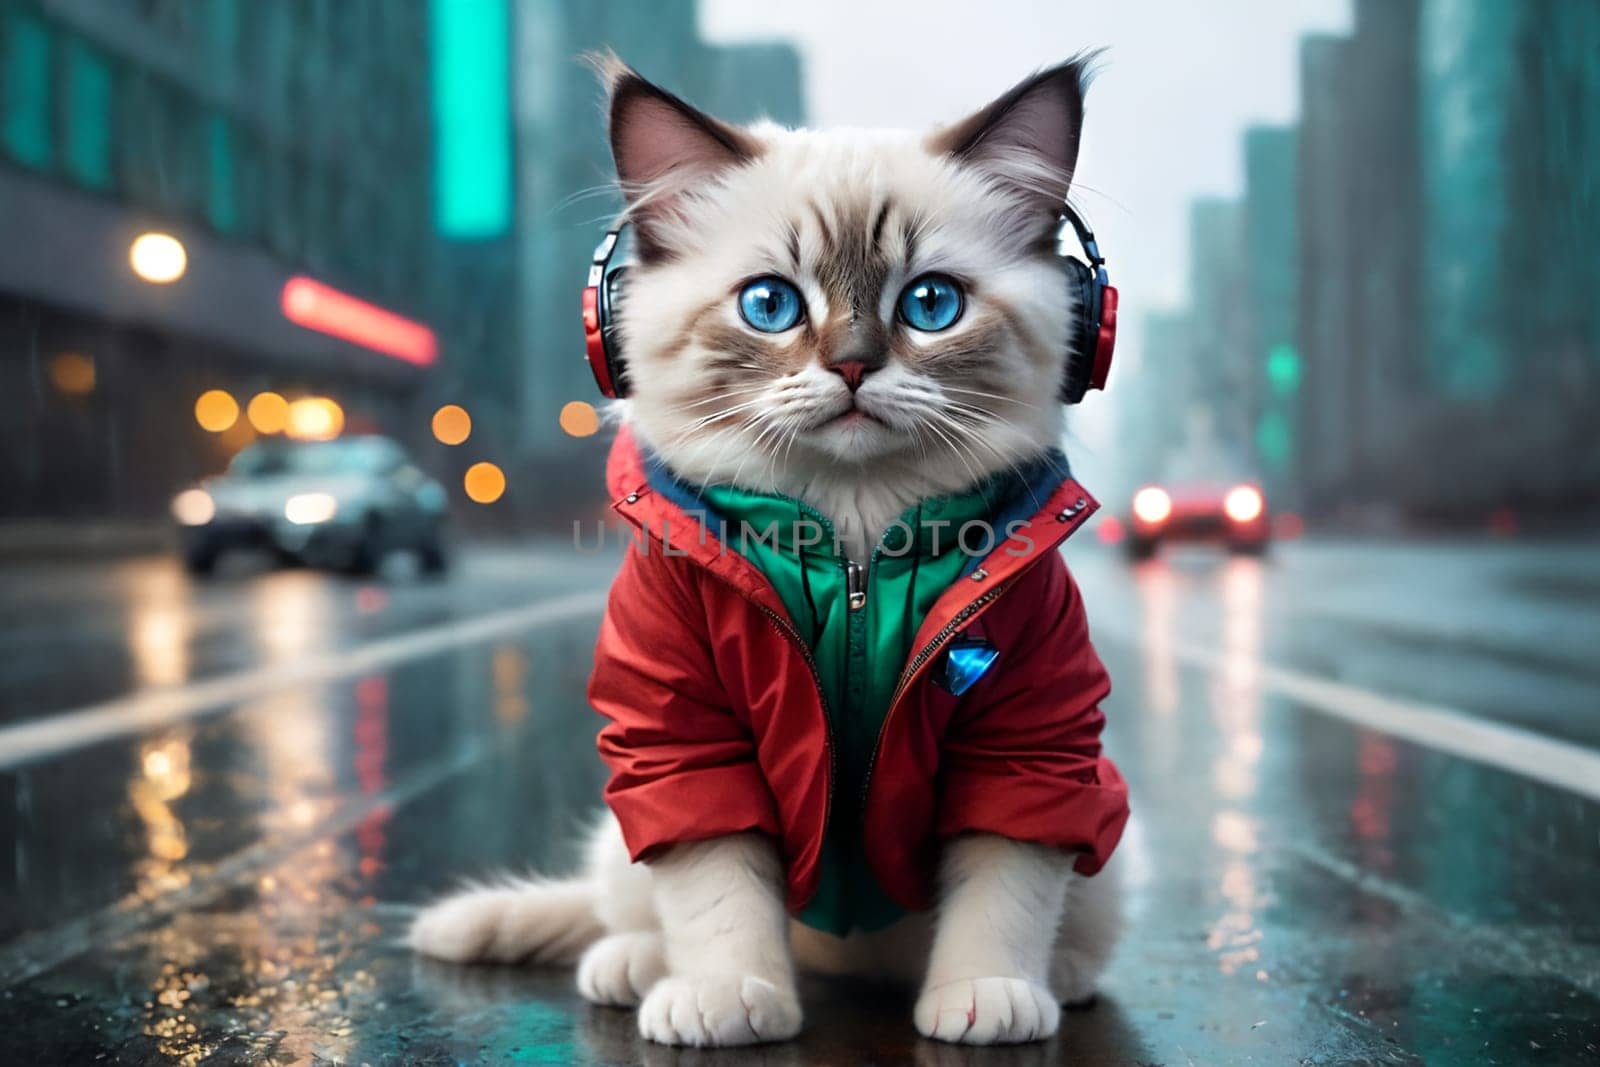 A domestic purebred Ragdoll kitten went out for a walk, wearing headphones and a jacket. by Rawlik